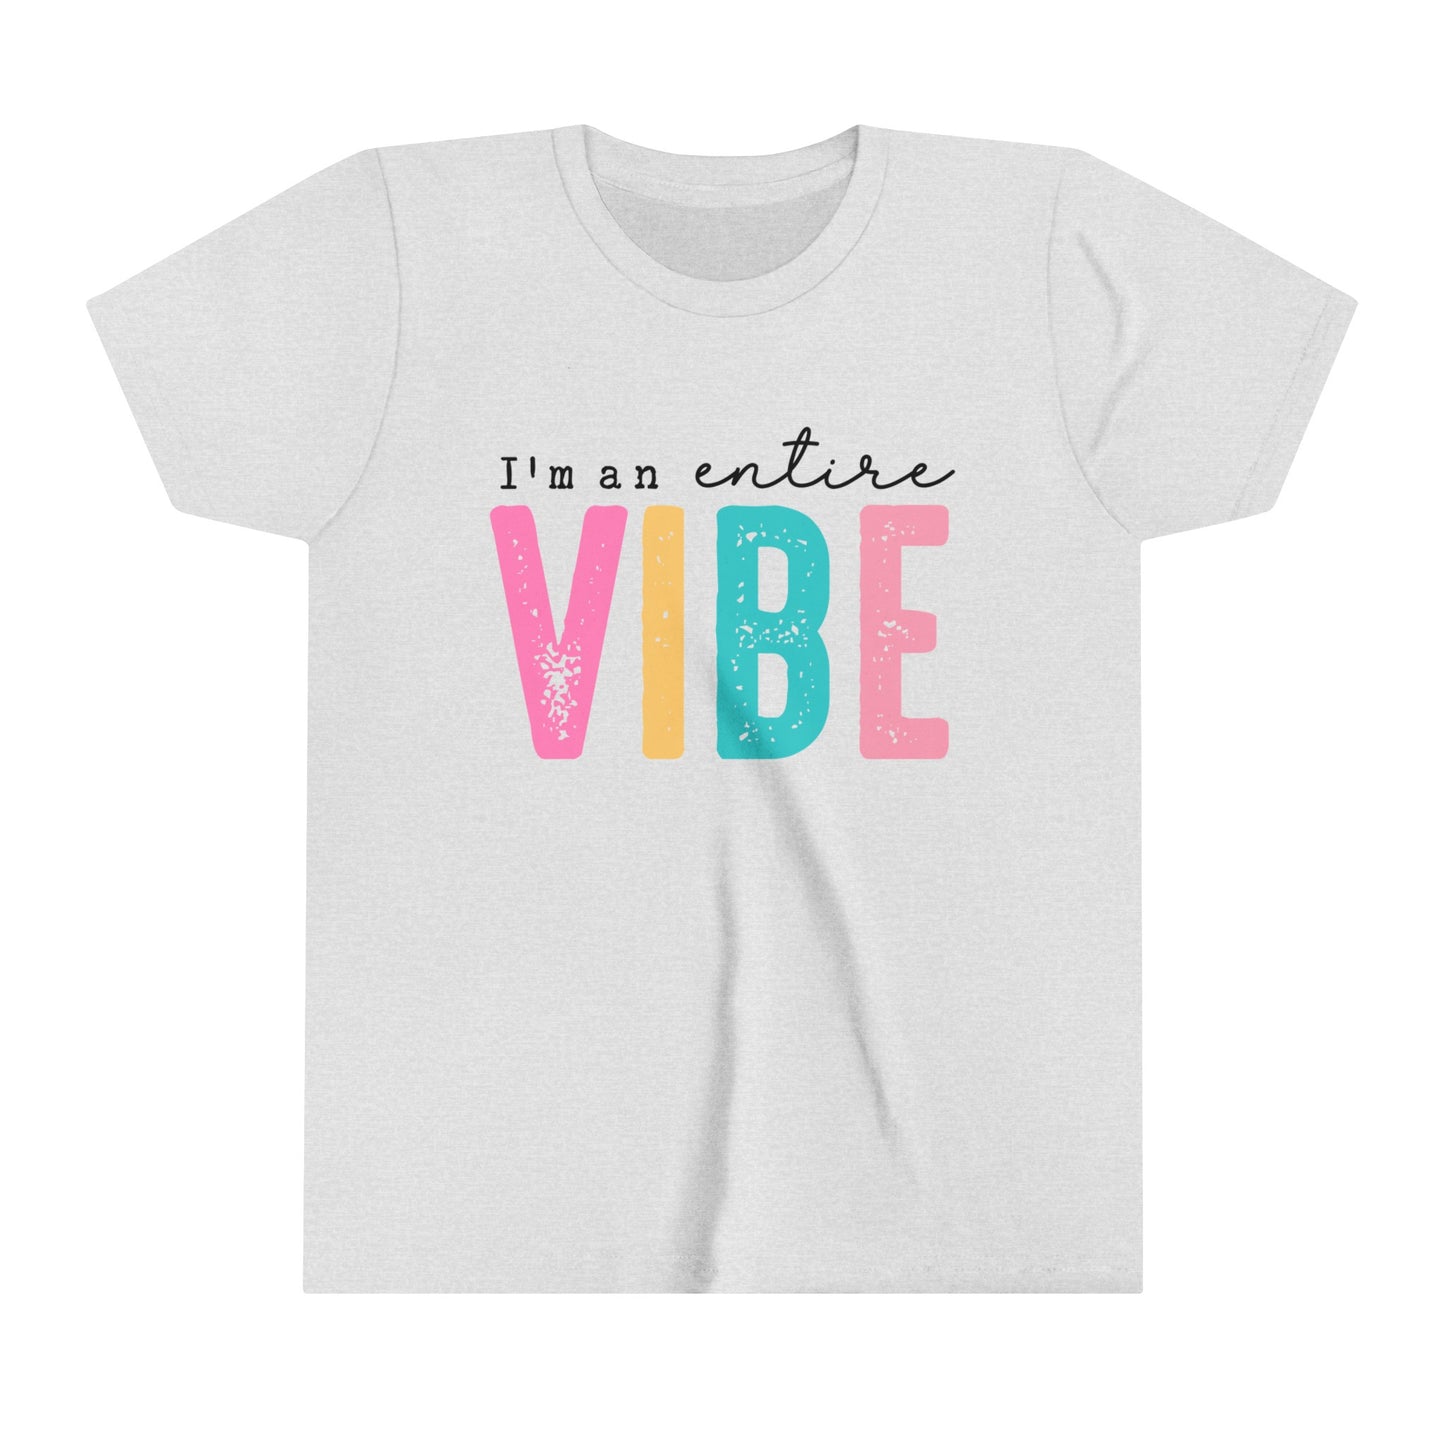 I'm an Entire Vibe Girl's Youth Funny Short Sleeve Shirt